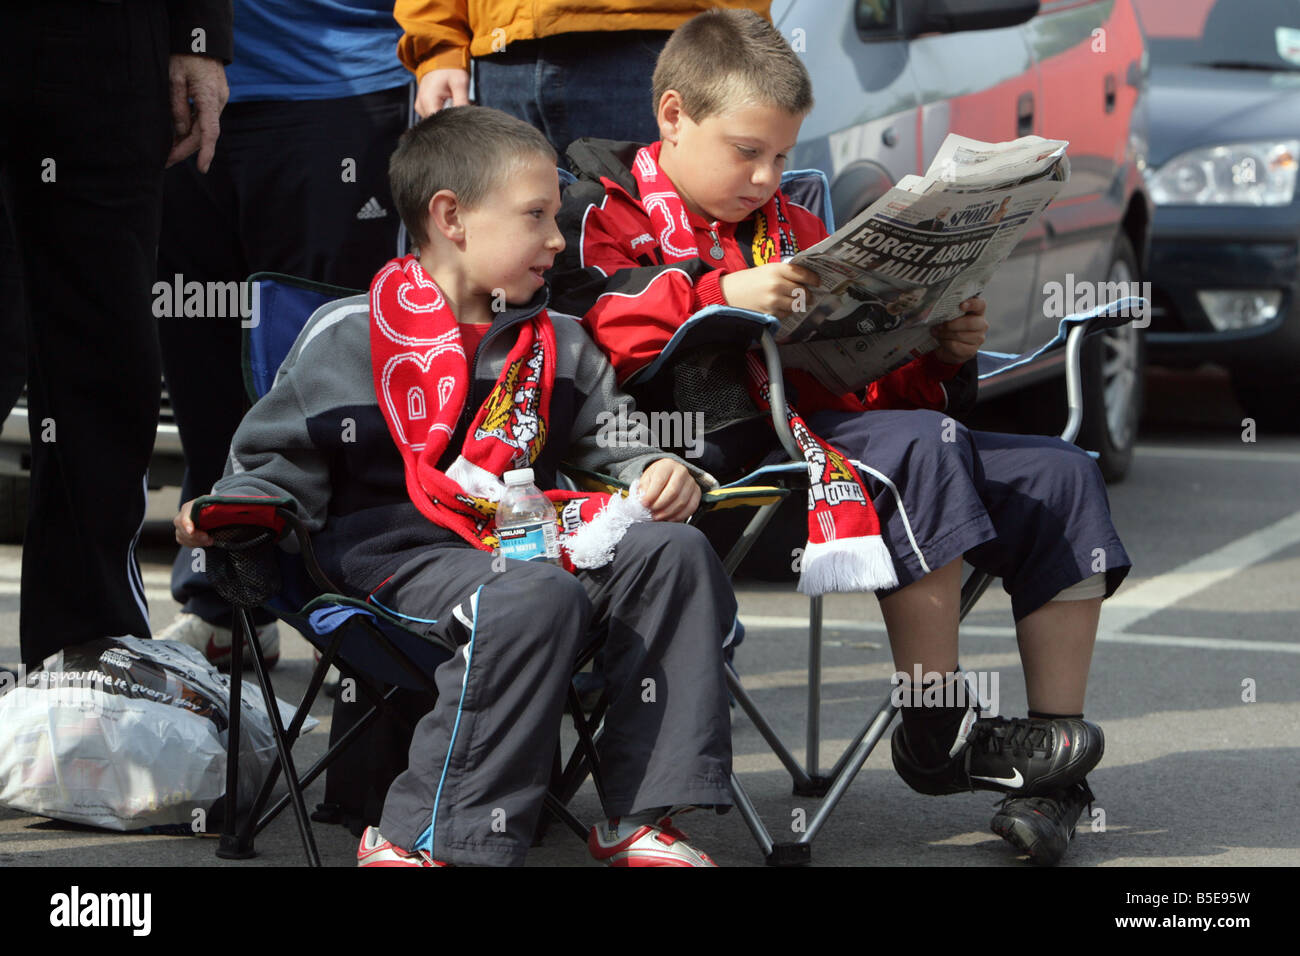 two young Bristol City football fans sit in chairs in a que for football tickets, one boy reads a newpaper. Stock Photo